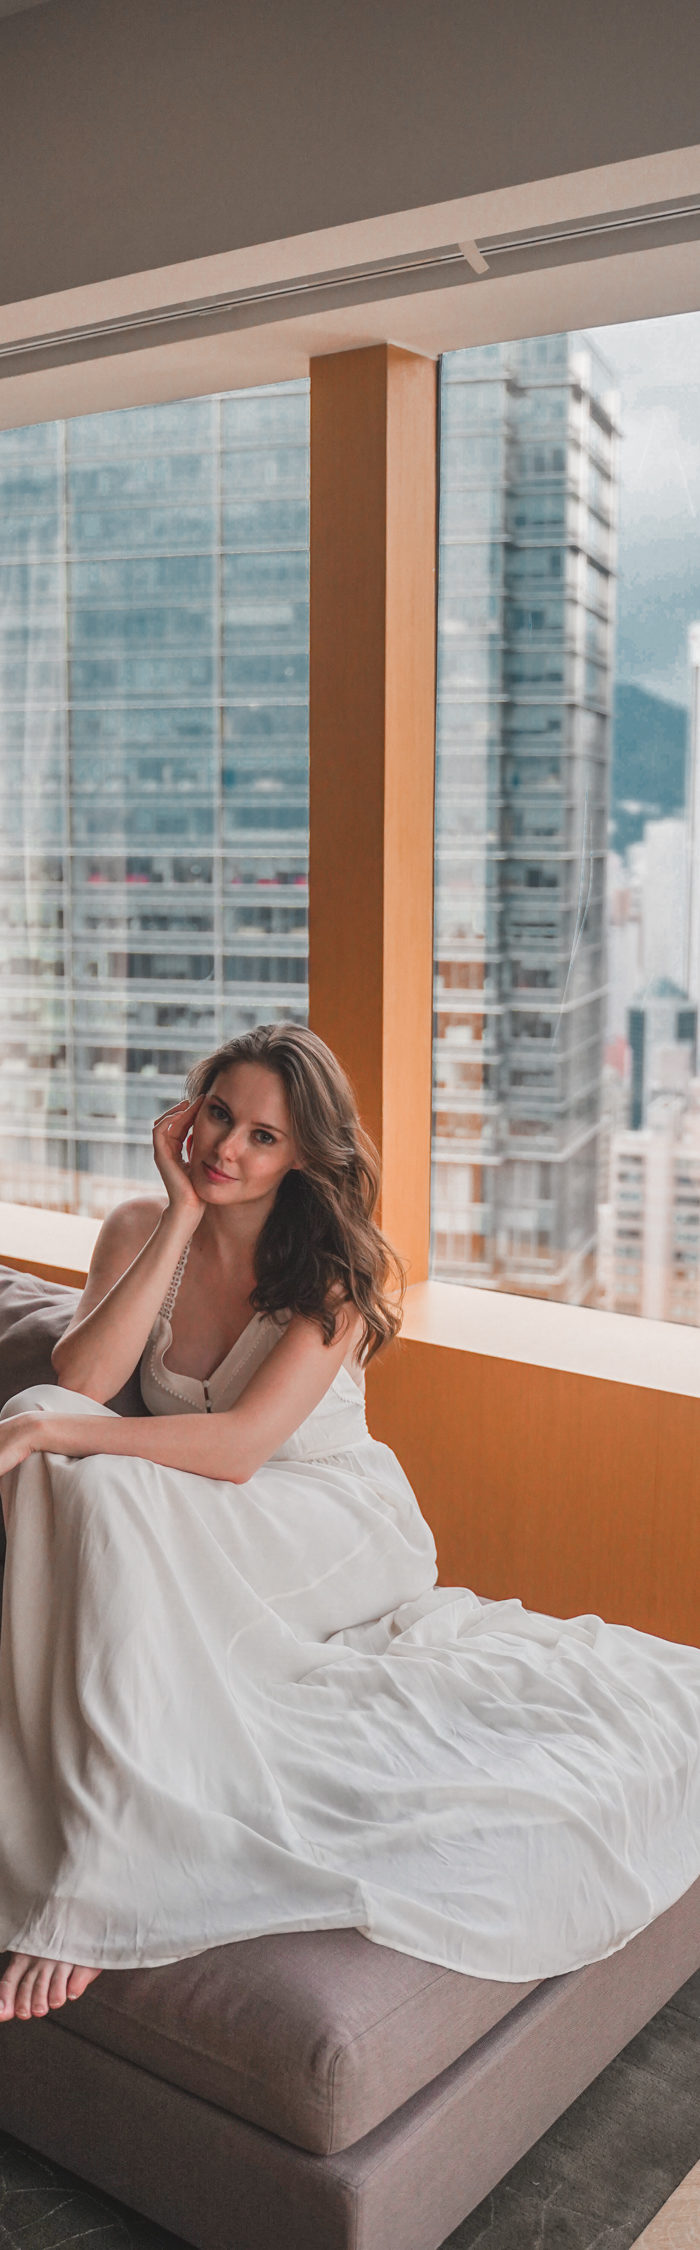 Miss USA 2011 Alyssa Campanella of The A List blog visits The Upper House in Hong Kong